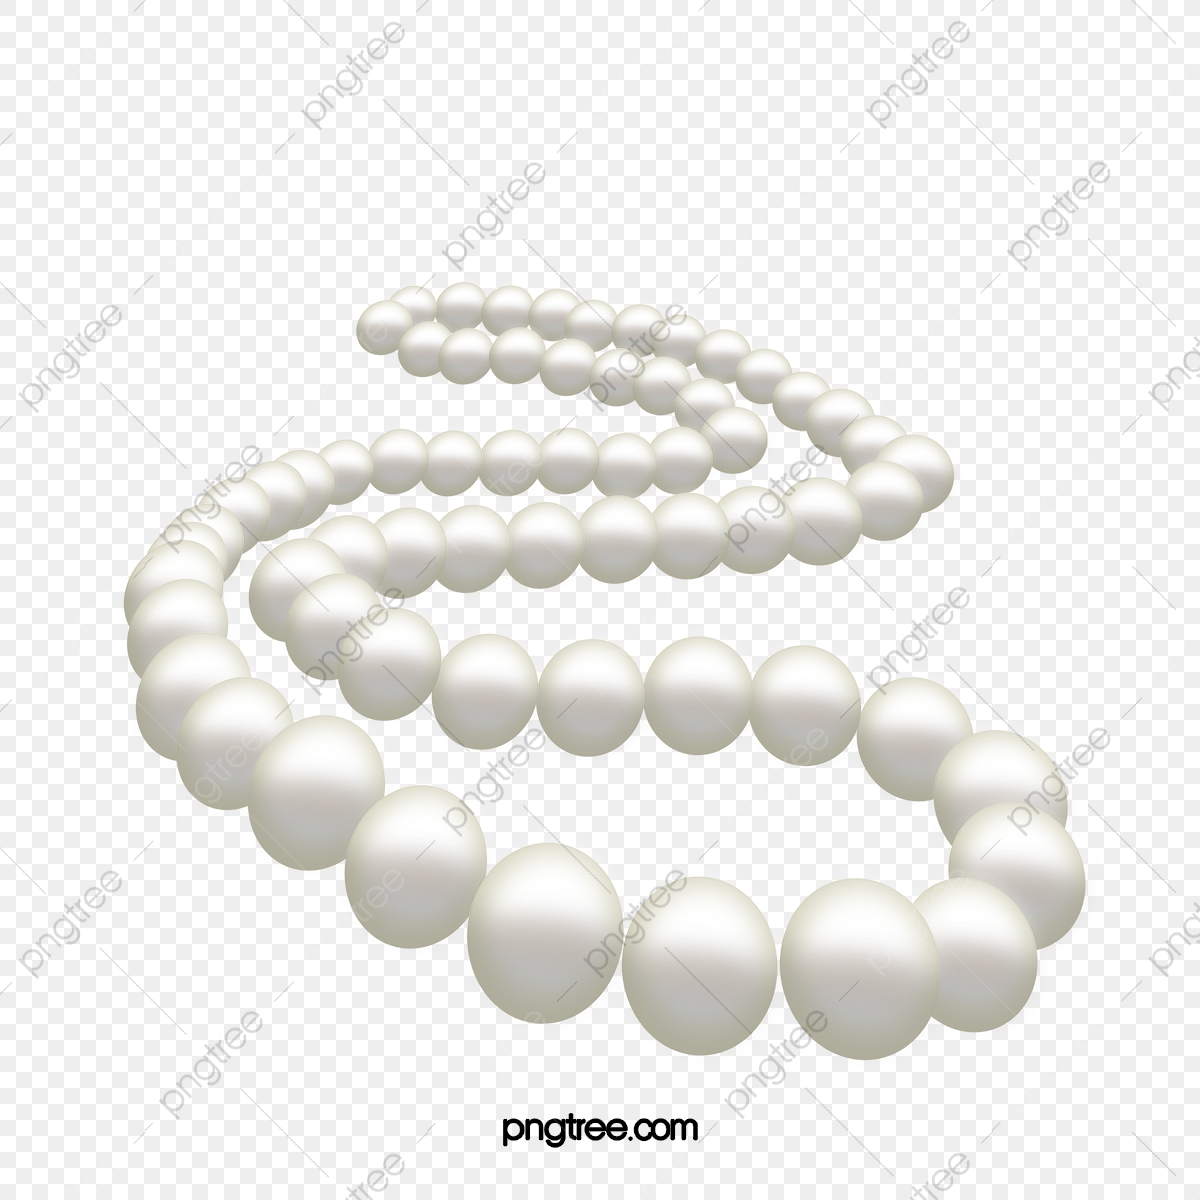 Round deep shell pearl. Pearls clipart file